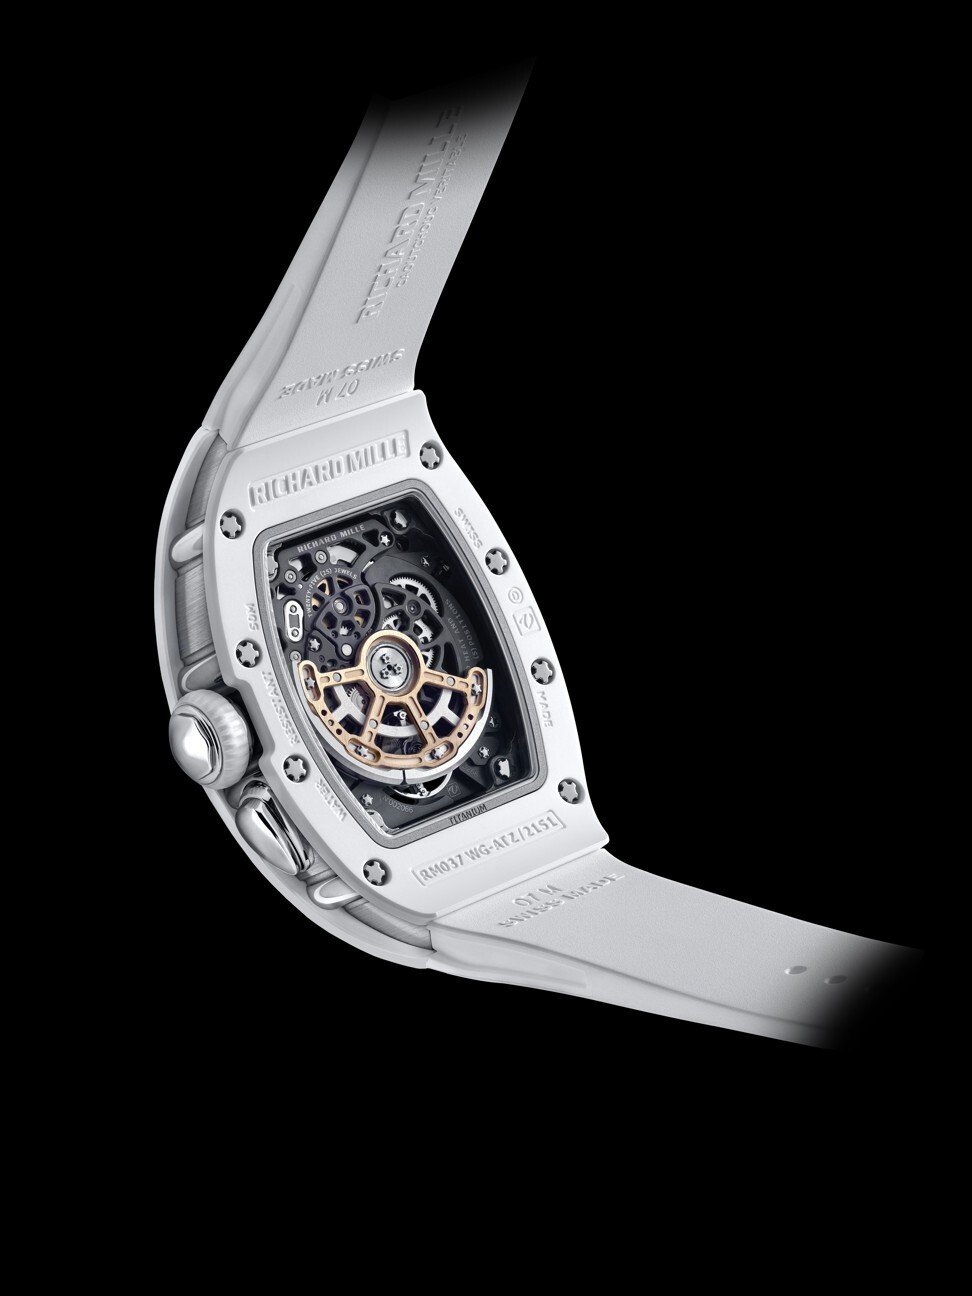 The watch runs on Richard Mille’s CRMA1 calibre featuring a red-gold variable-geometry rotor. Photo: Richard Mille